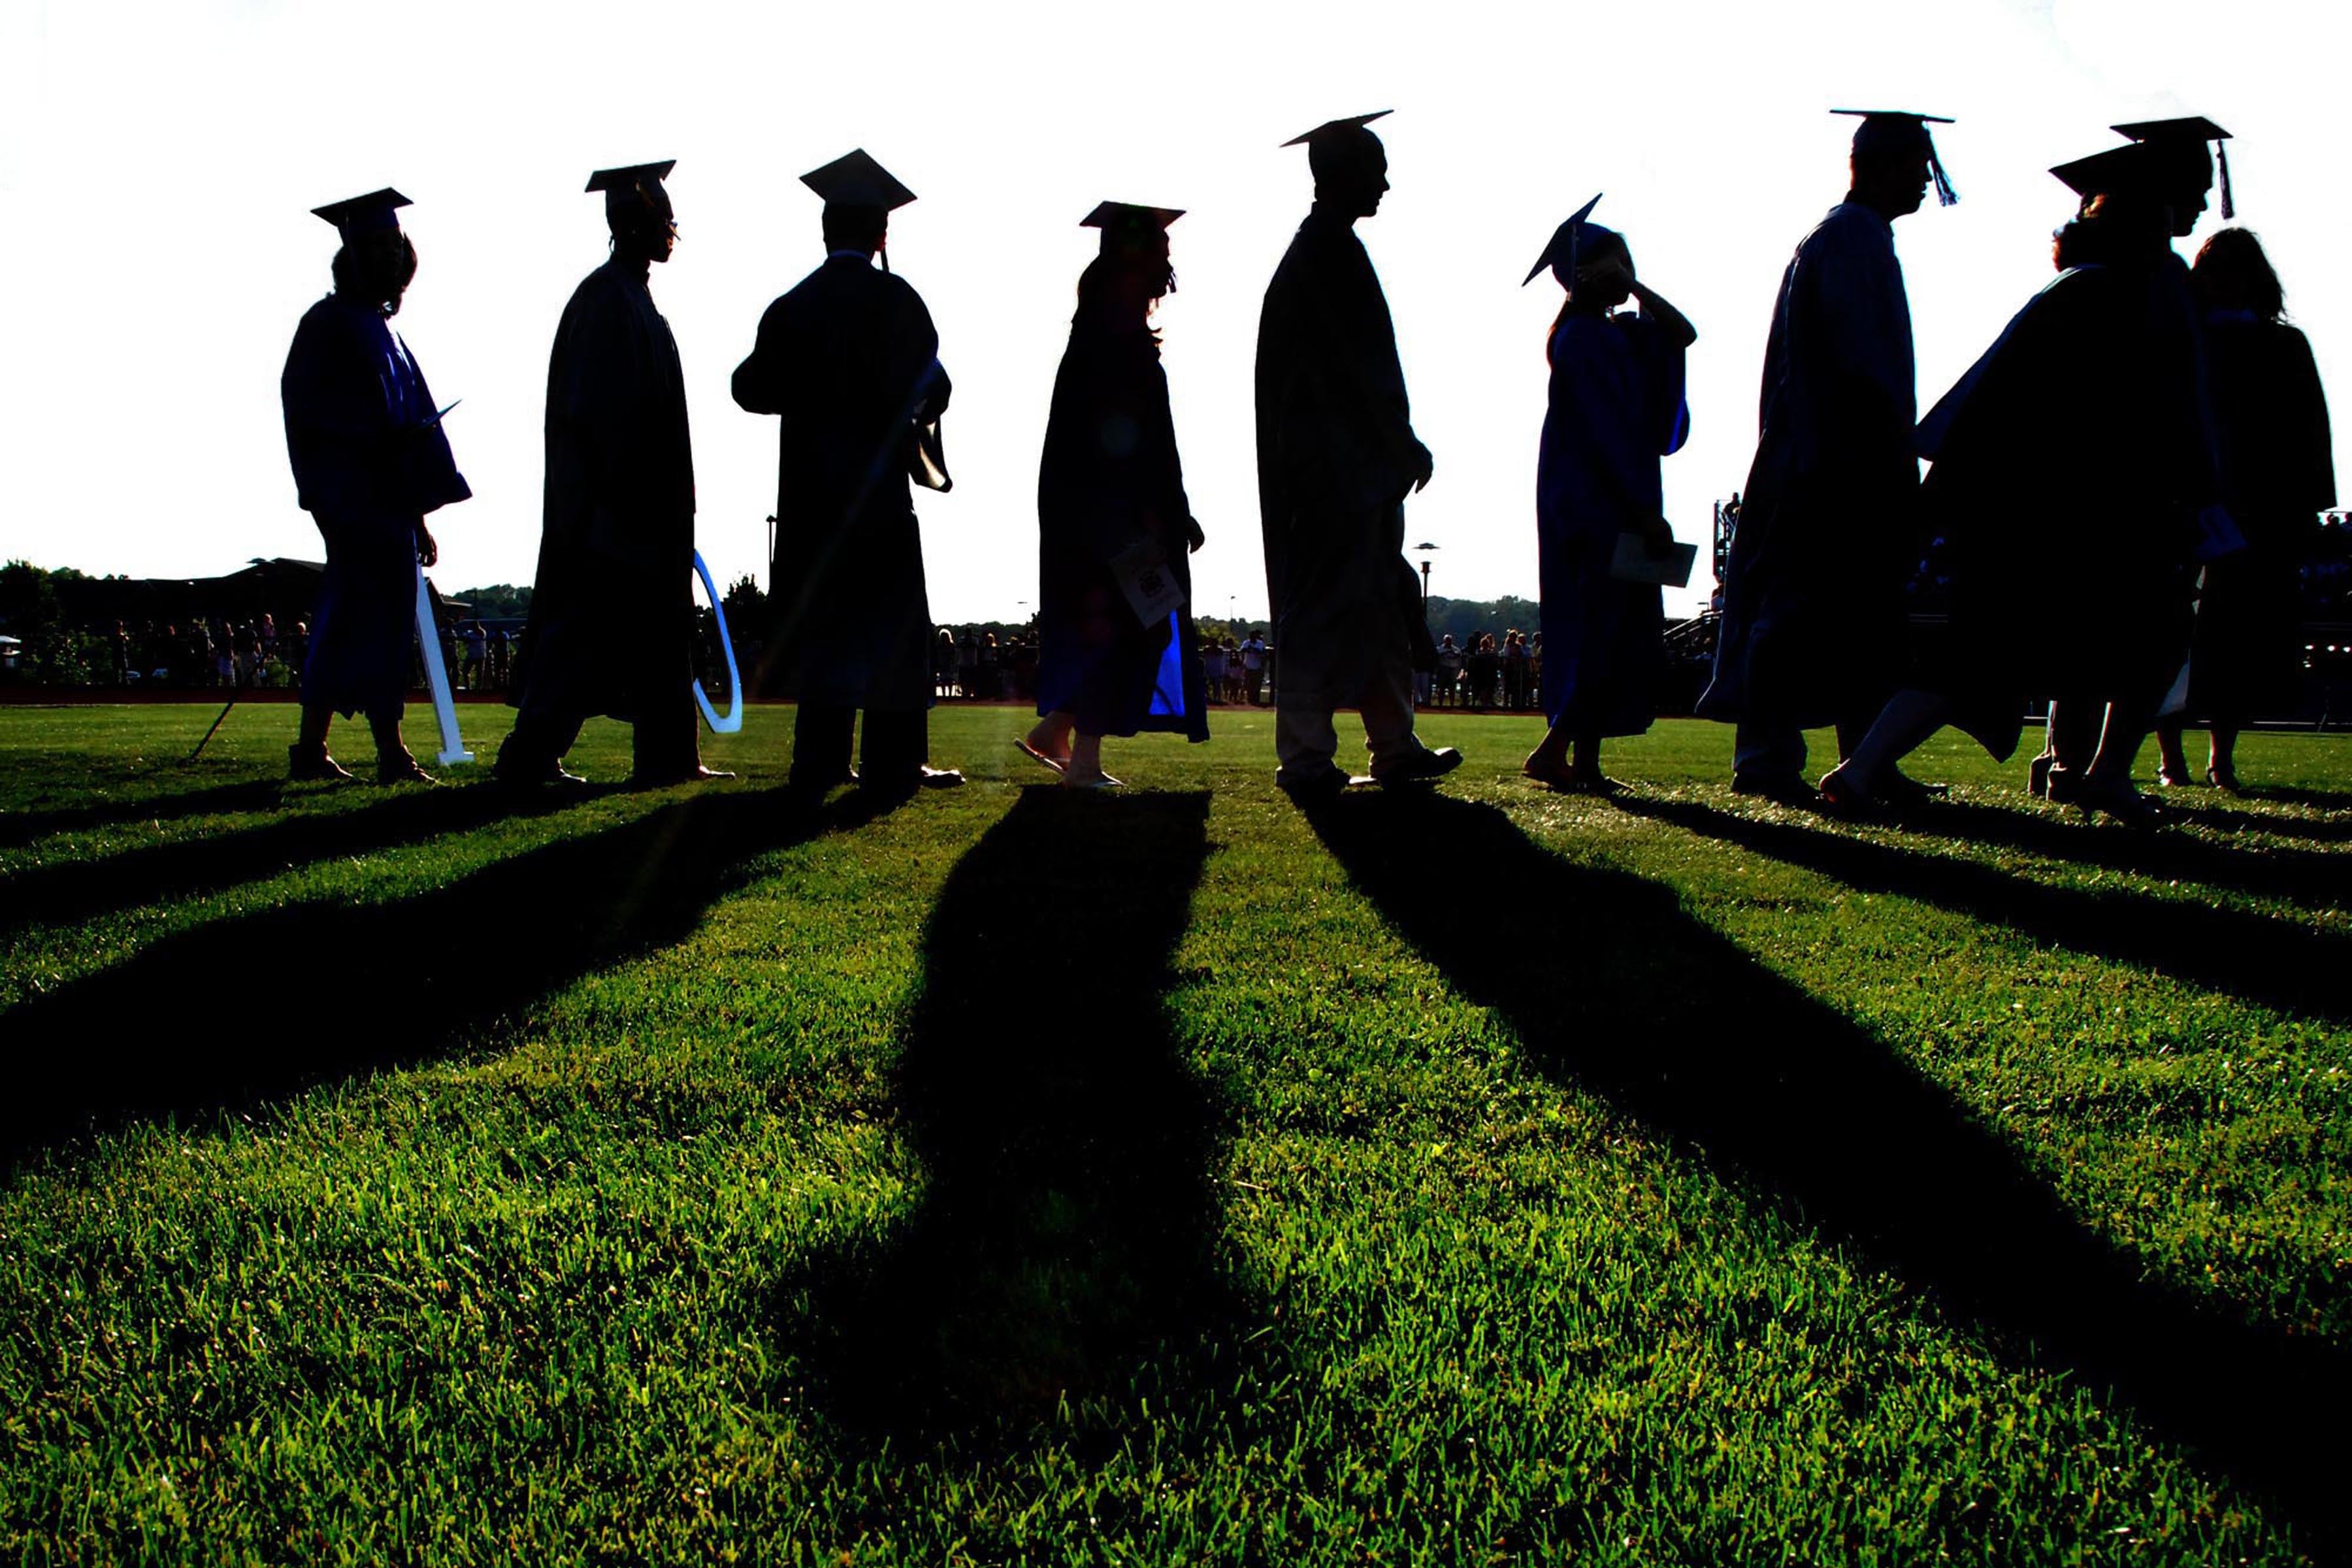 Graduates are silhouetted in a line.